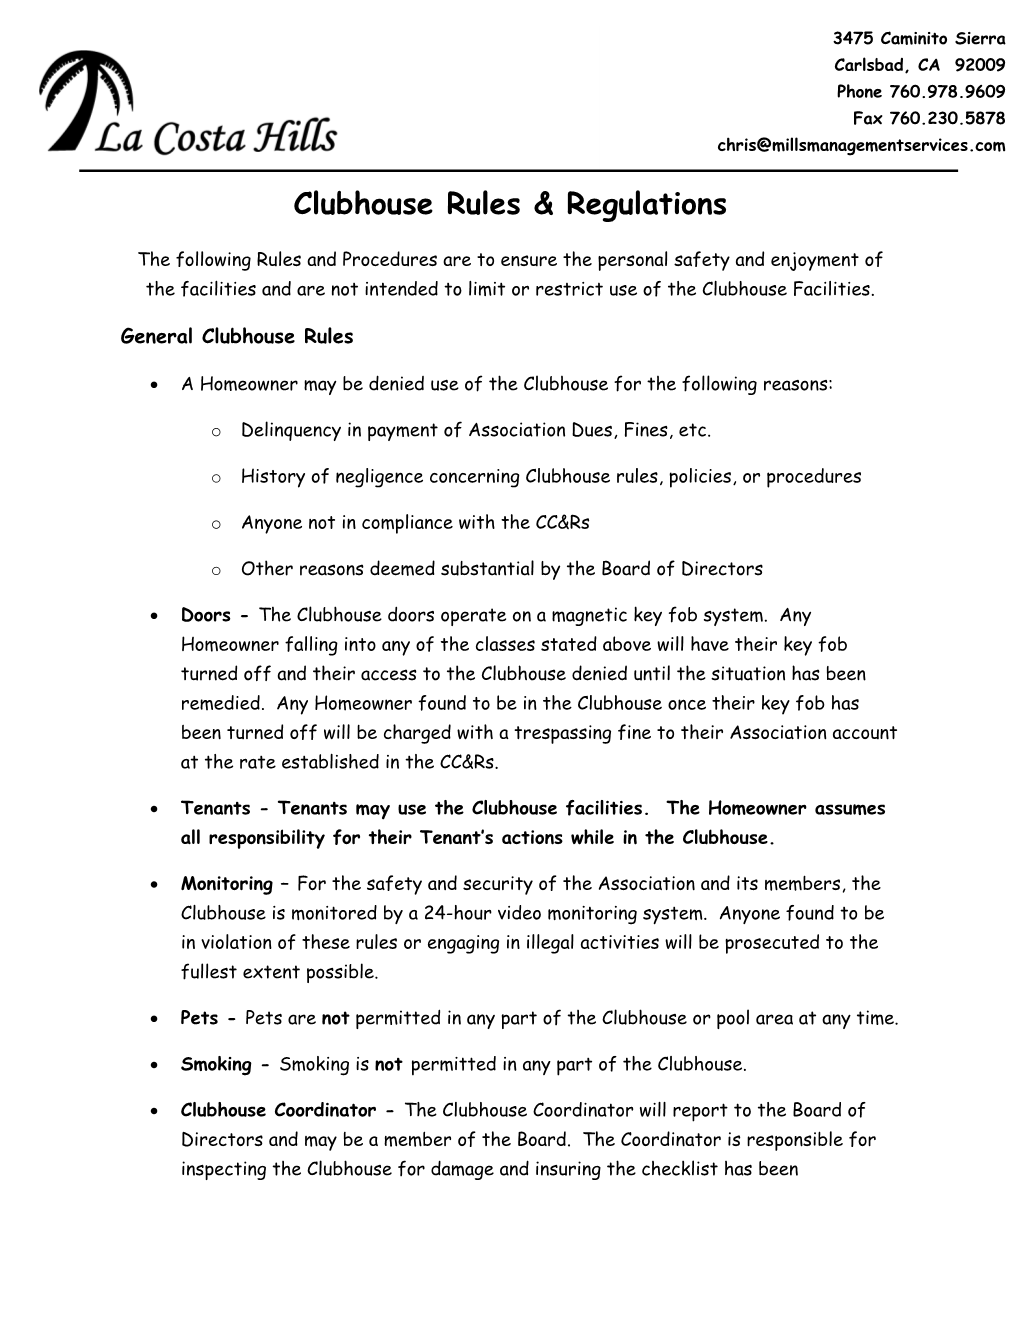 Clubhouse Rules & Regulations